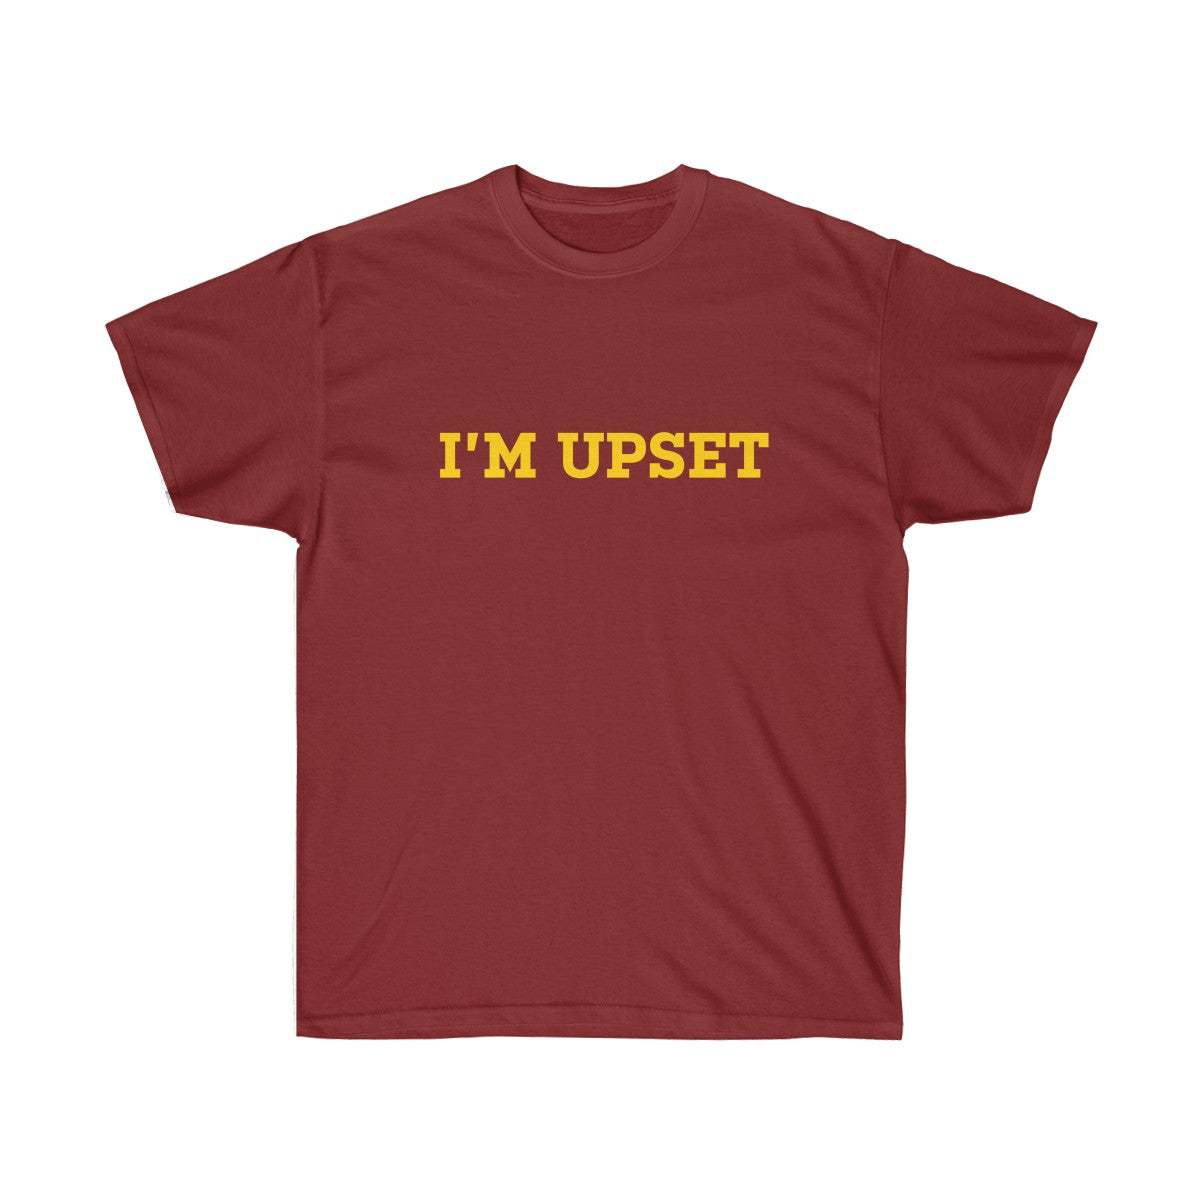 I'm Upset Tee - Drizzy Drake Scorpion inspired-Cardinal Red-S-Archethype